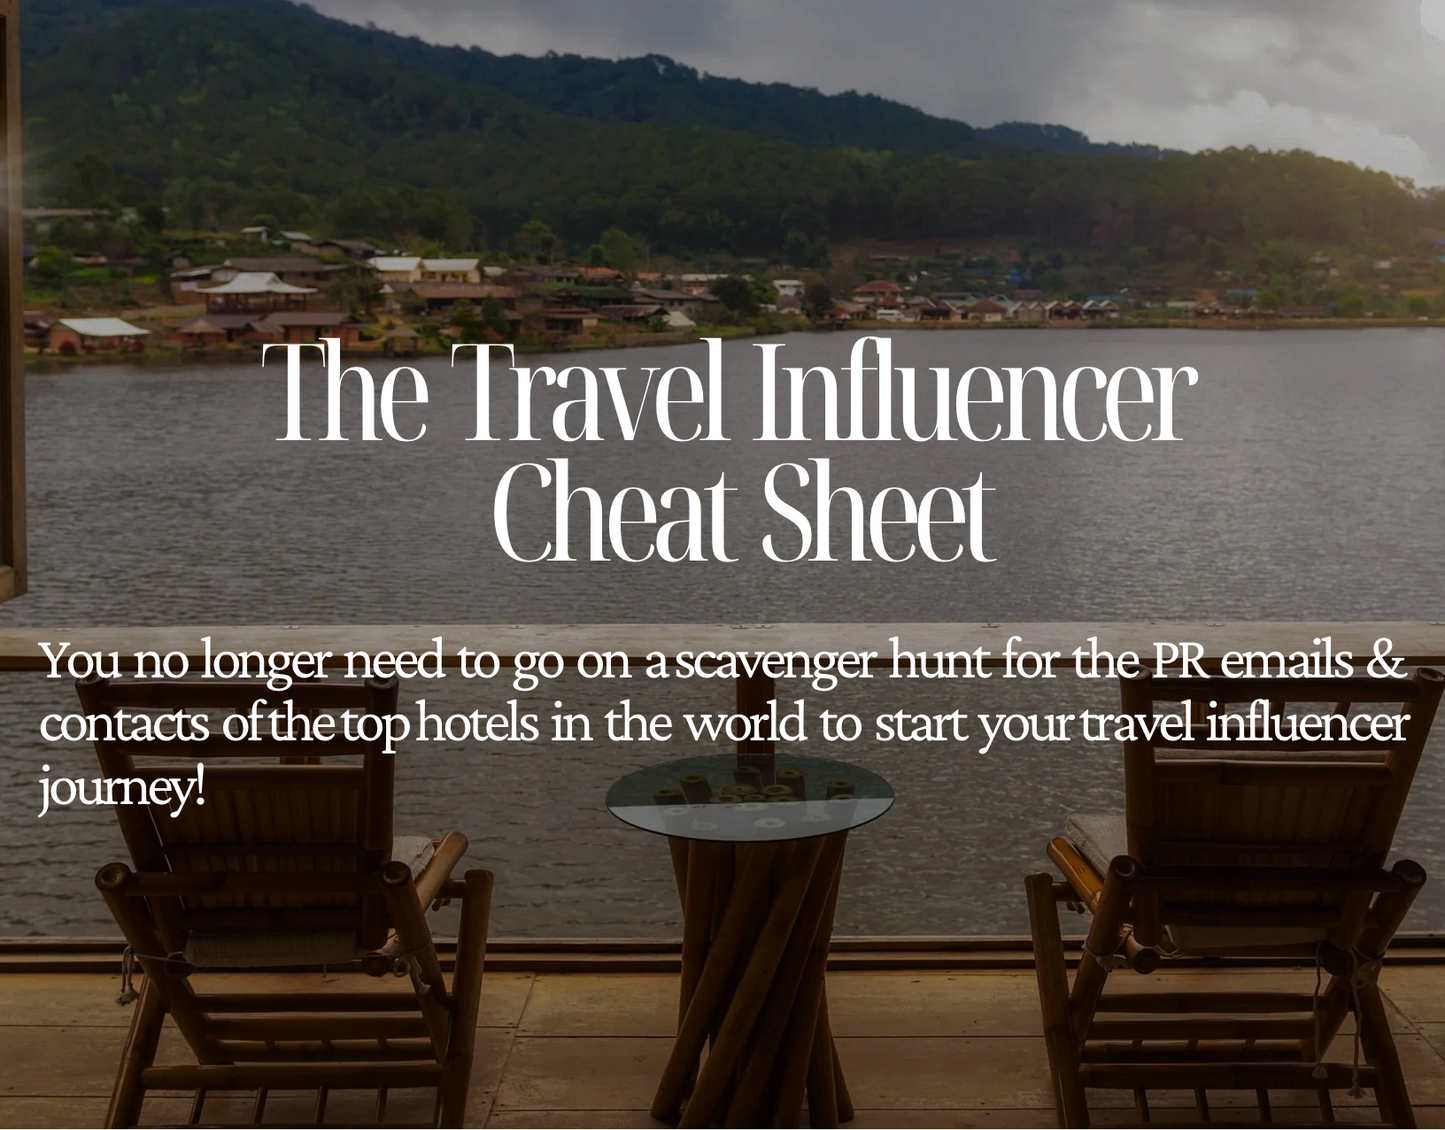 The Ultimate Travel Influencer Cheat Sheet